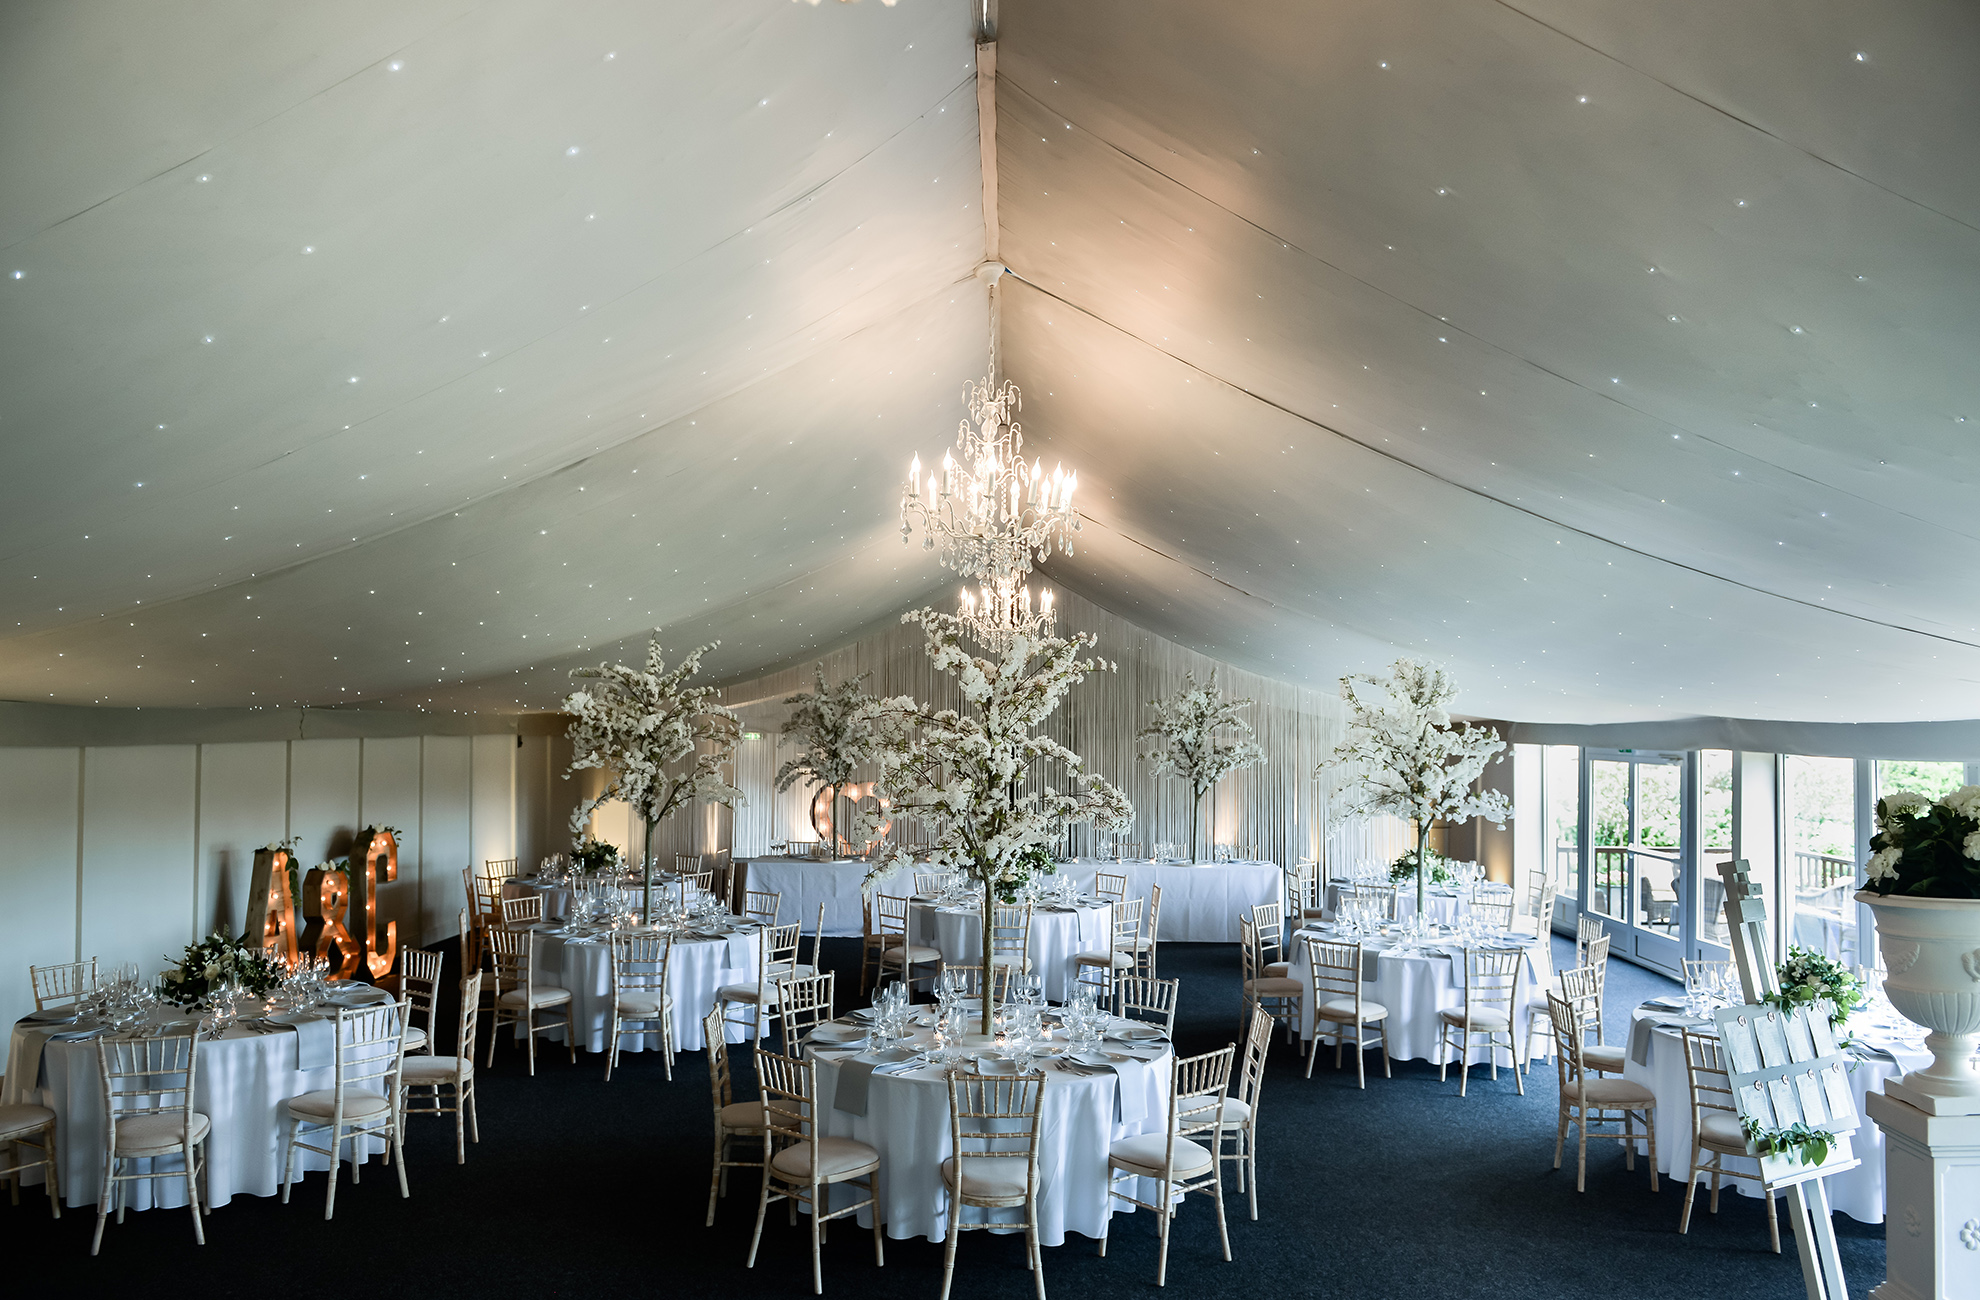 The Pavillion at this Cheshire wedding venue is set up for a stunning wedding breakfast